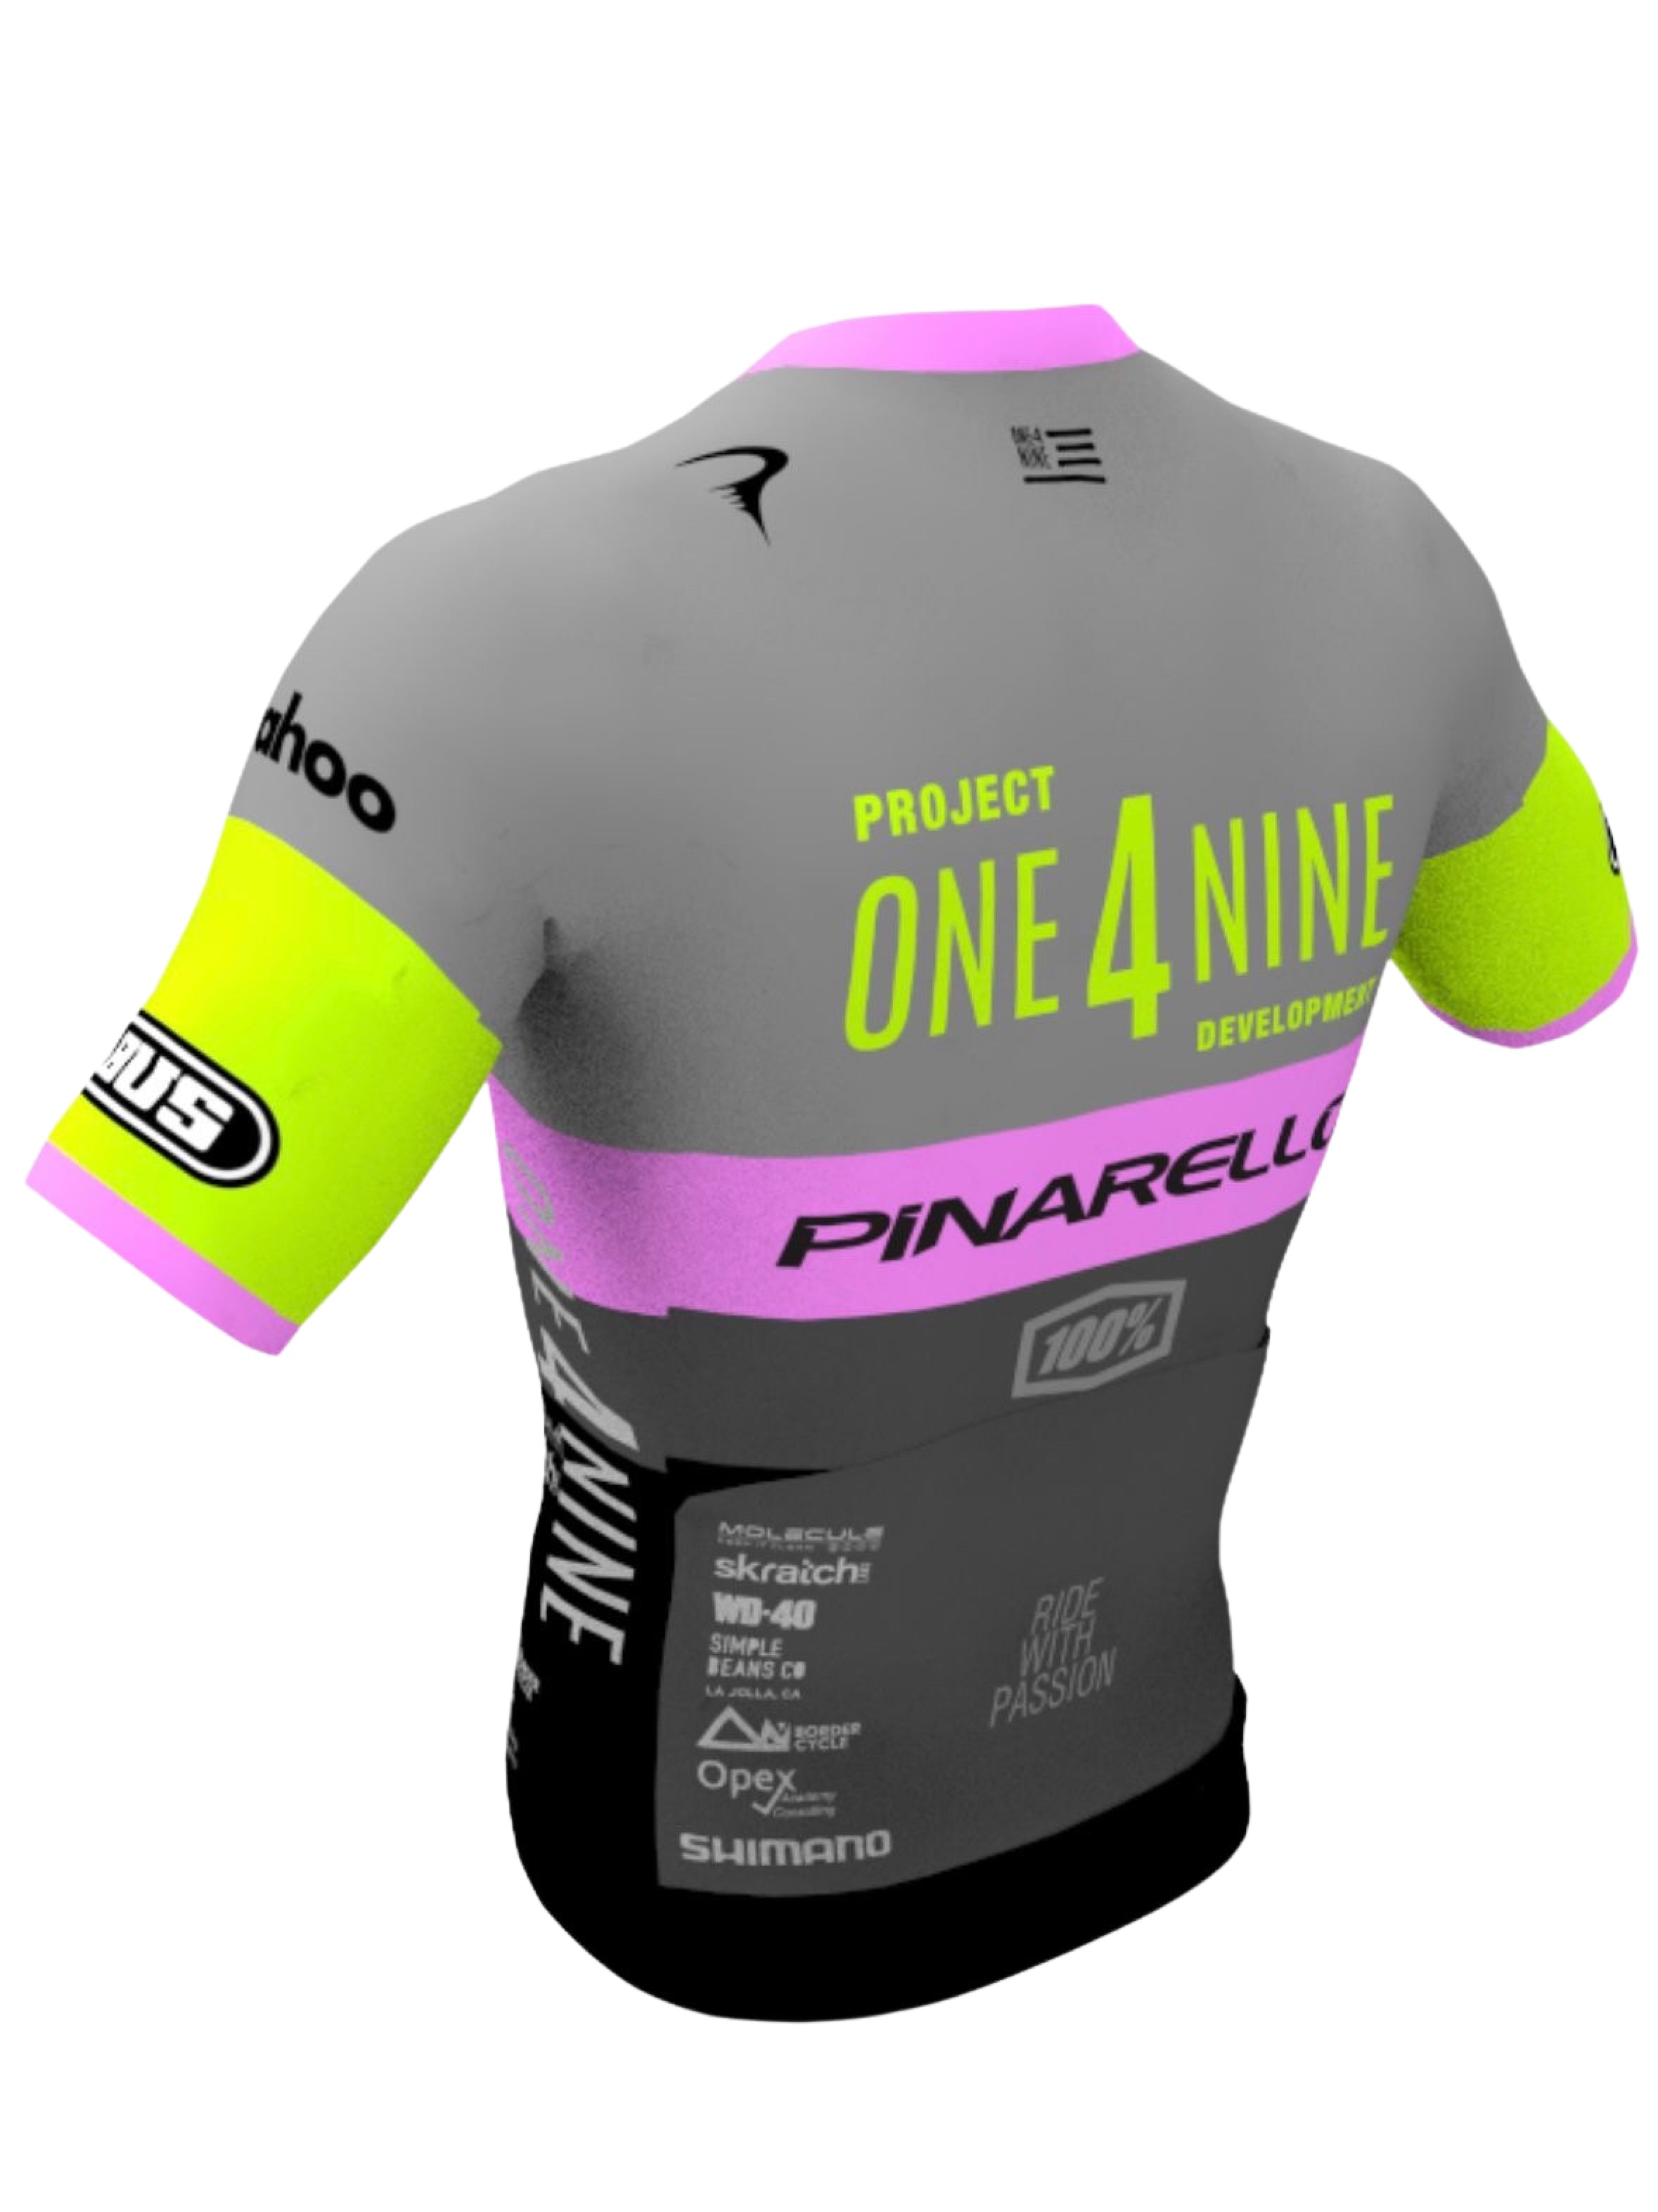 Project One4nine TEAM TRAINING JERSEY - preorder